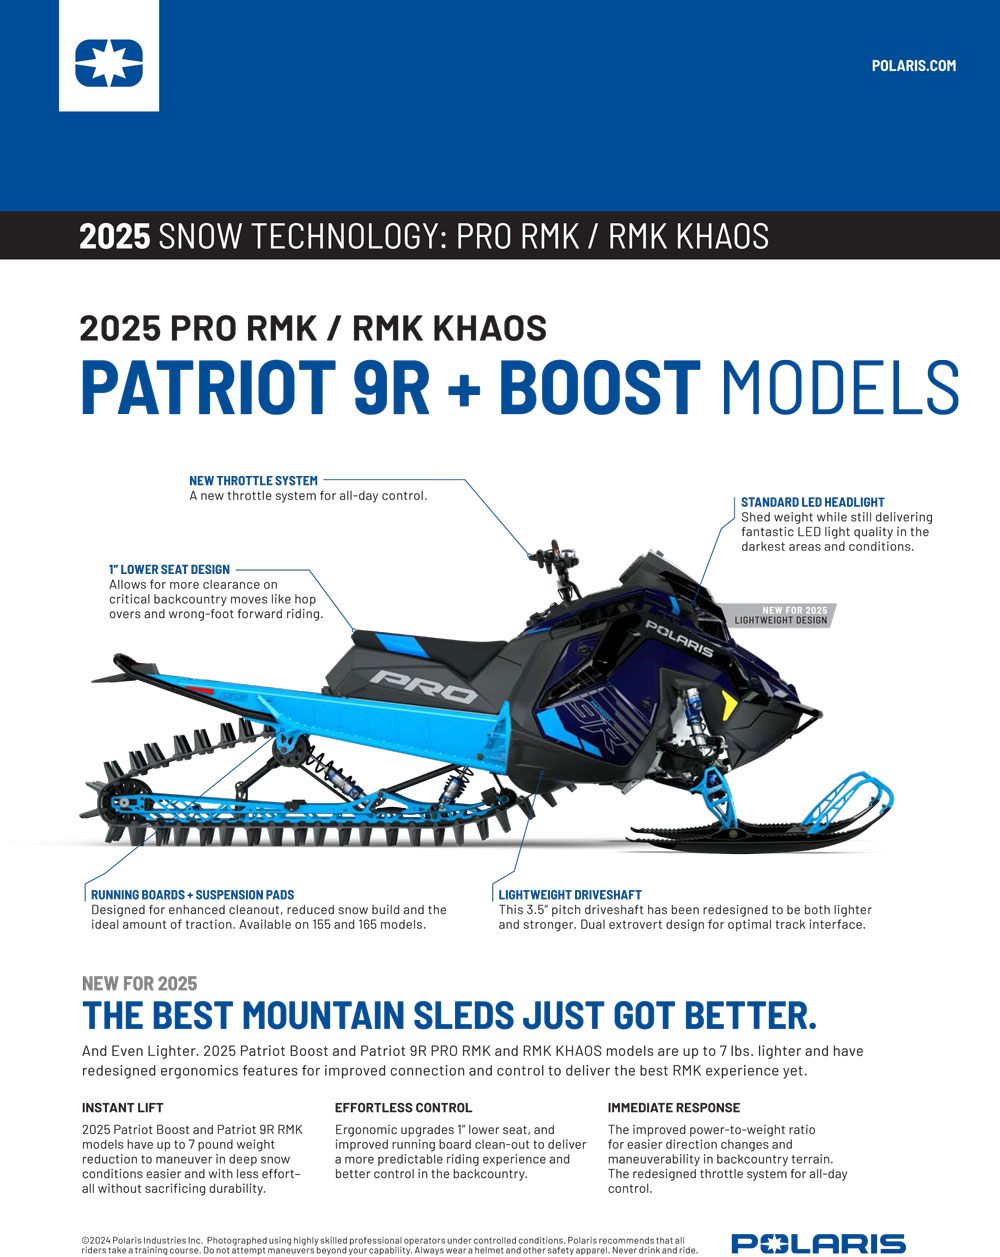 Patriot 9R and Boost Model Changes 2025